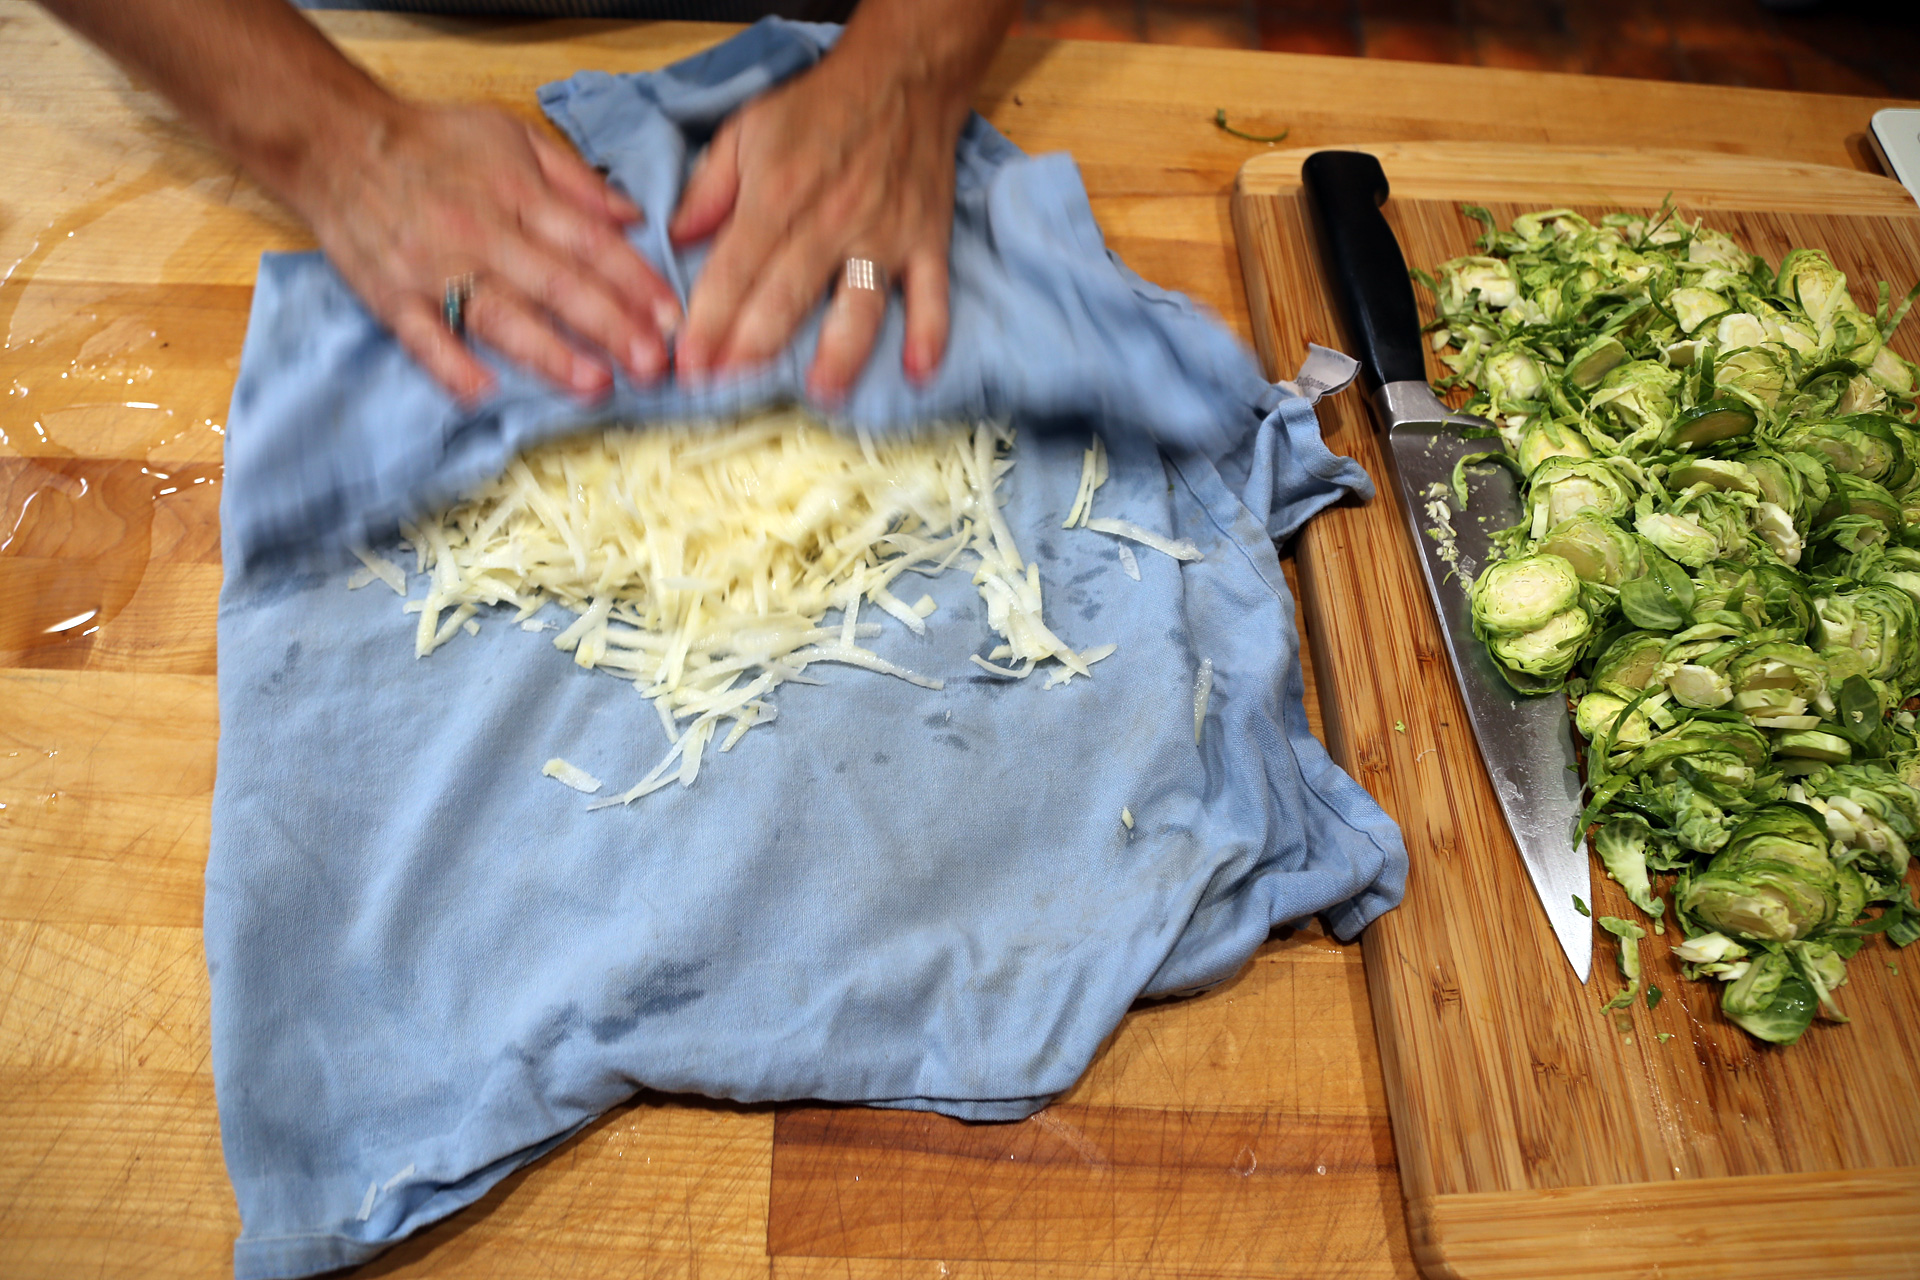 Drain the shredded potatoes and transfer to a dry kitchen towel. Press out as much water as possible.